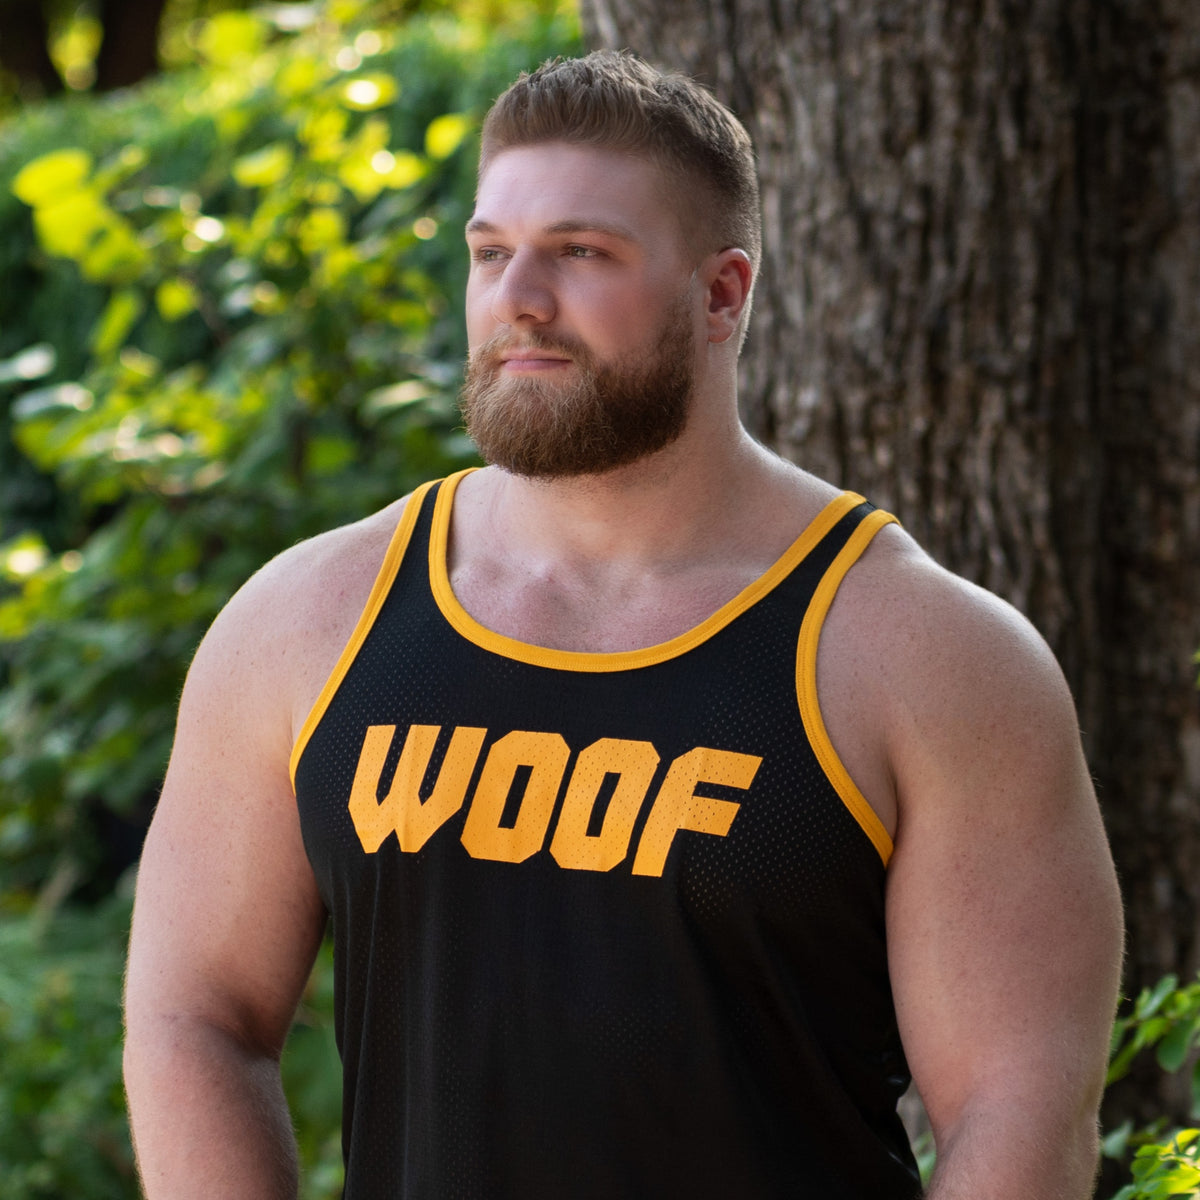 woof-black -&gt; The Woof Air Tank in Black, featuring a very handsome Riley